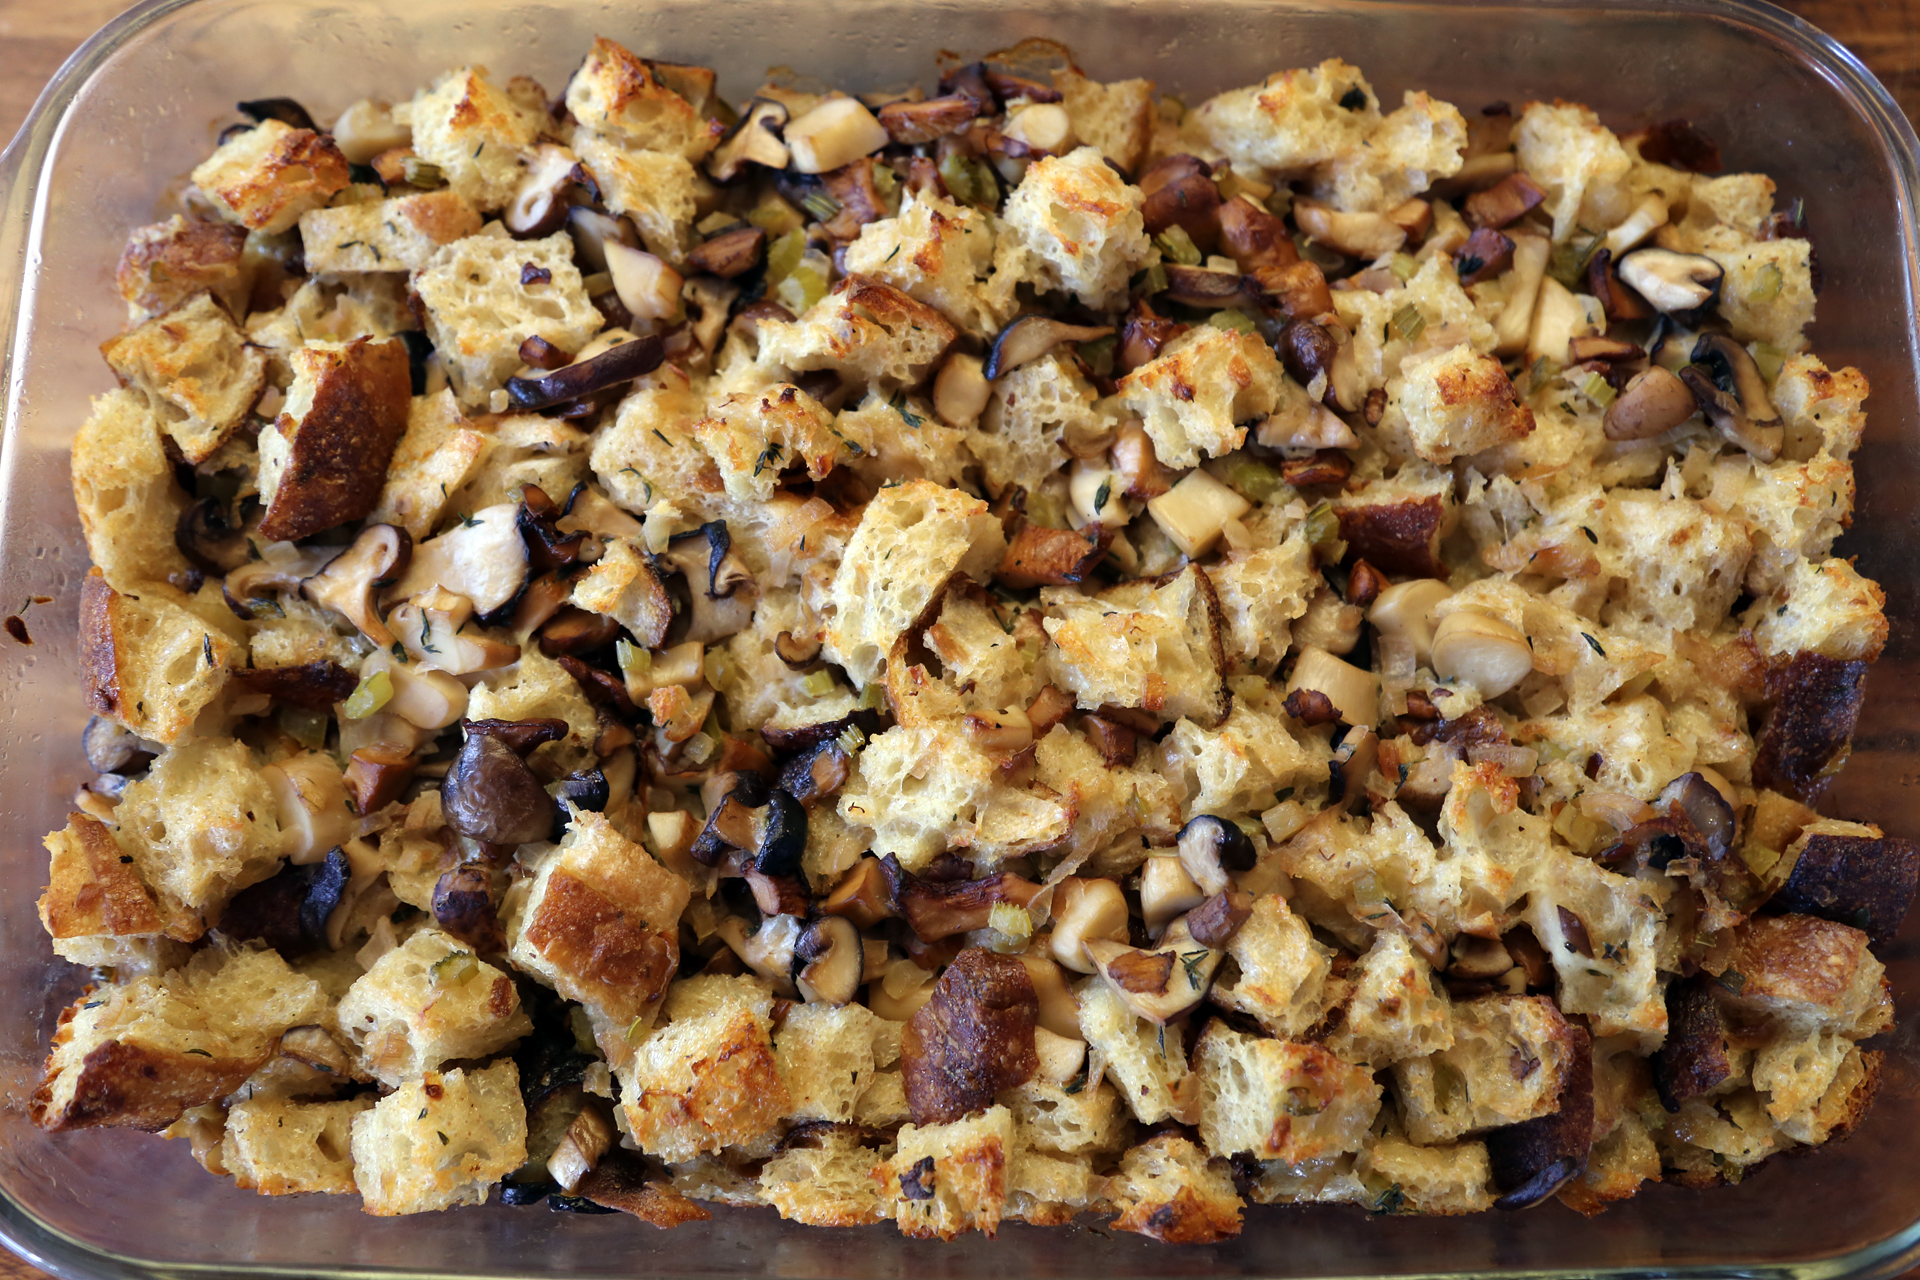 Wild Mushroom, Shallot, and Sourdough Stuffing with Herbs.